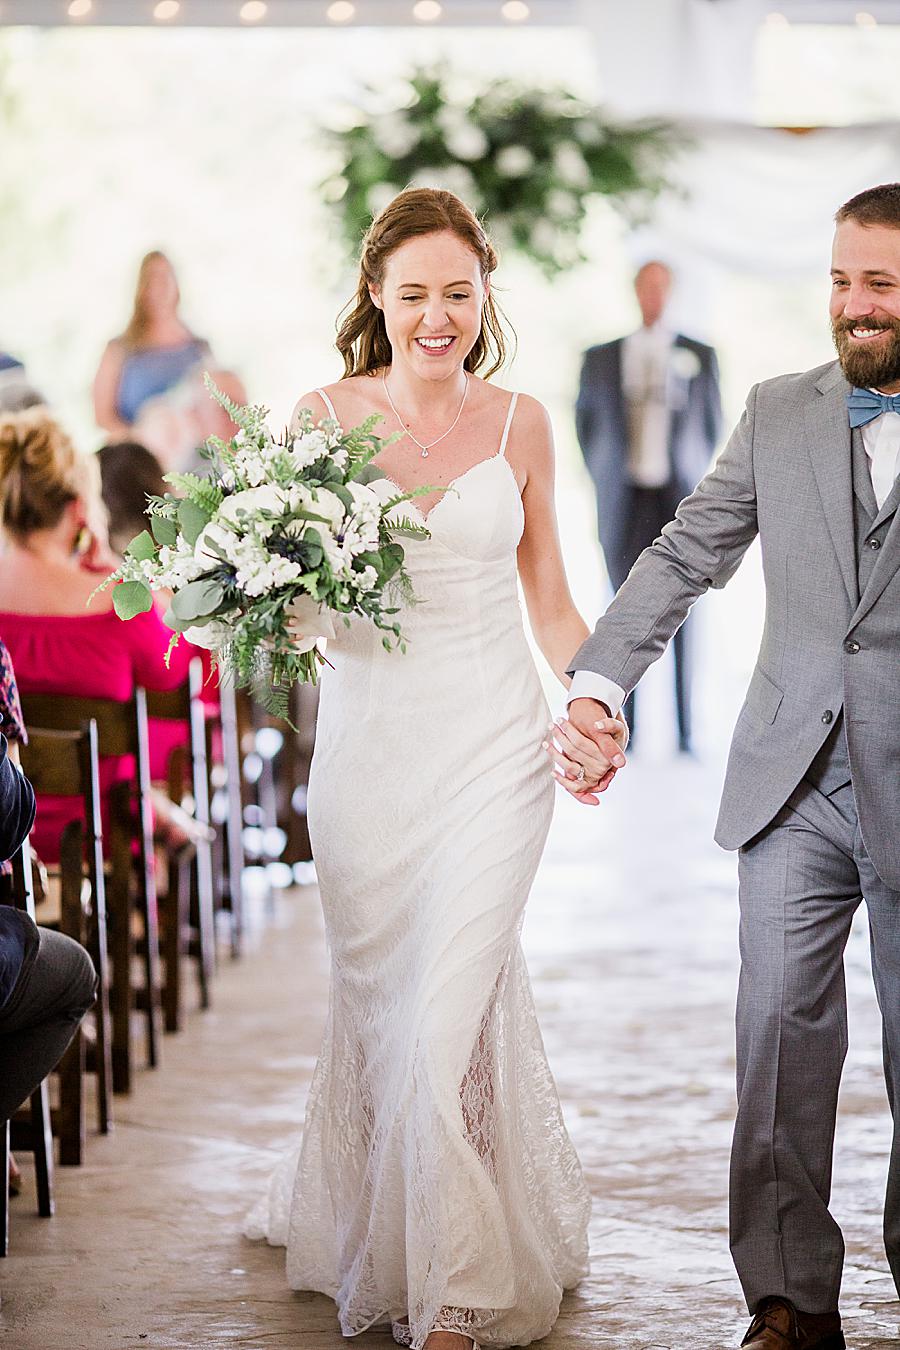 Recessional at this Marblegate Farm Wedding by Knoxville Wedding Photographer, Amanda May Photos.